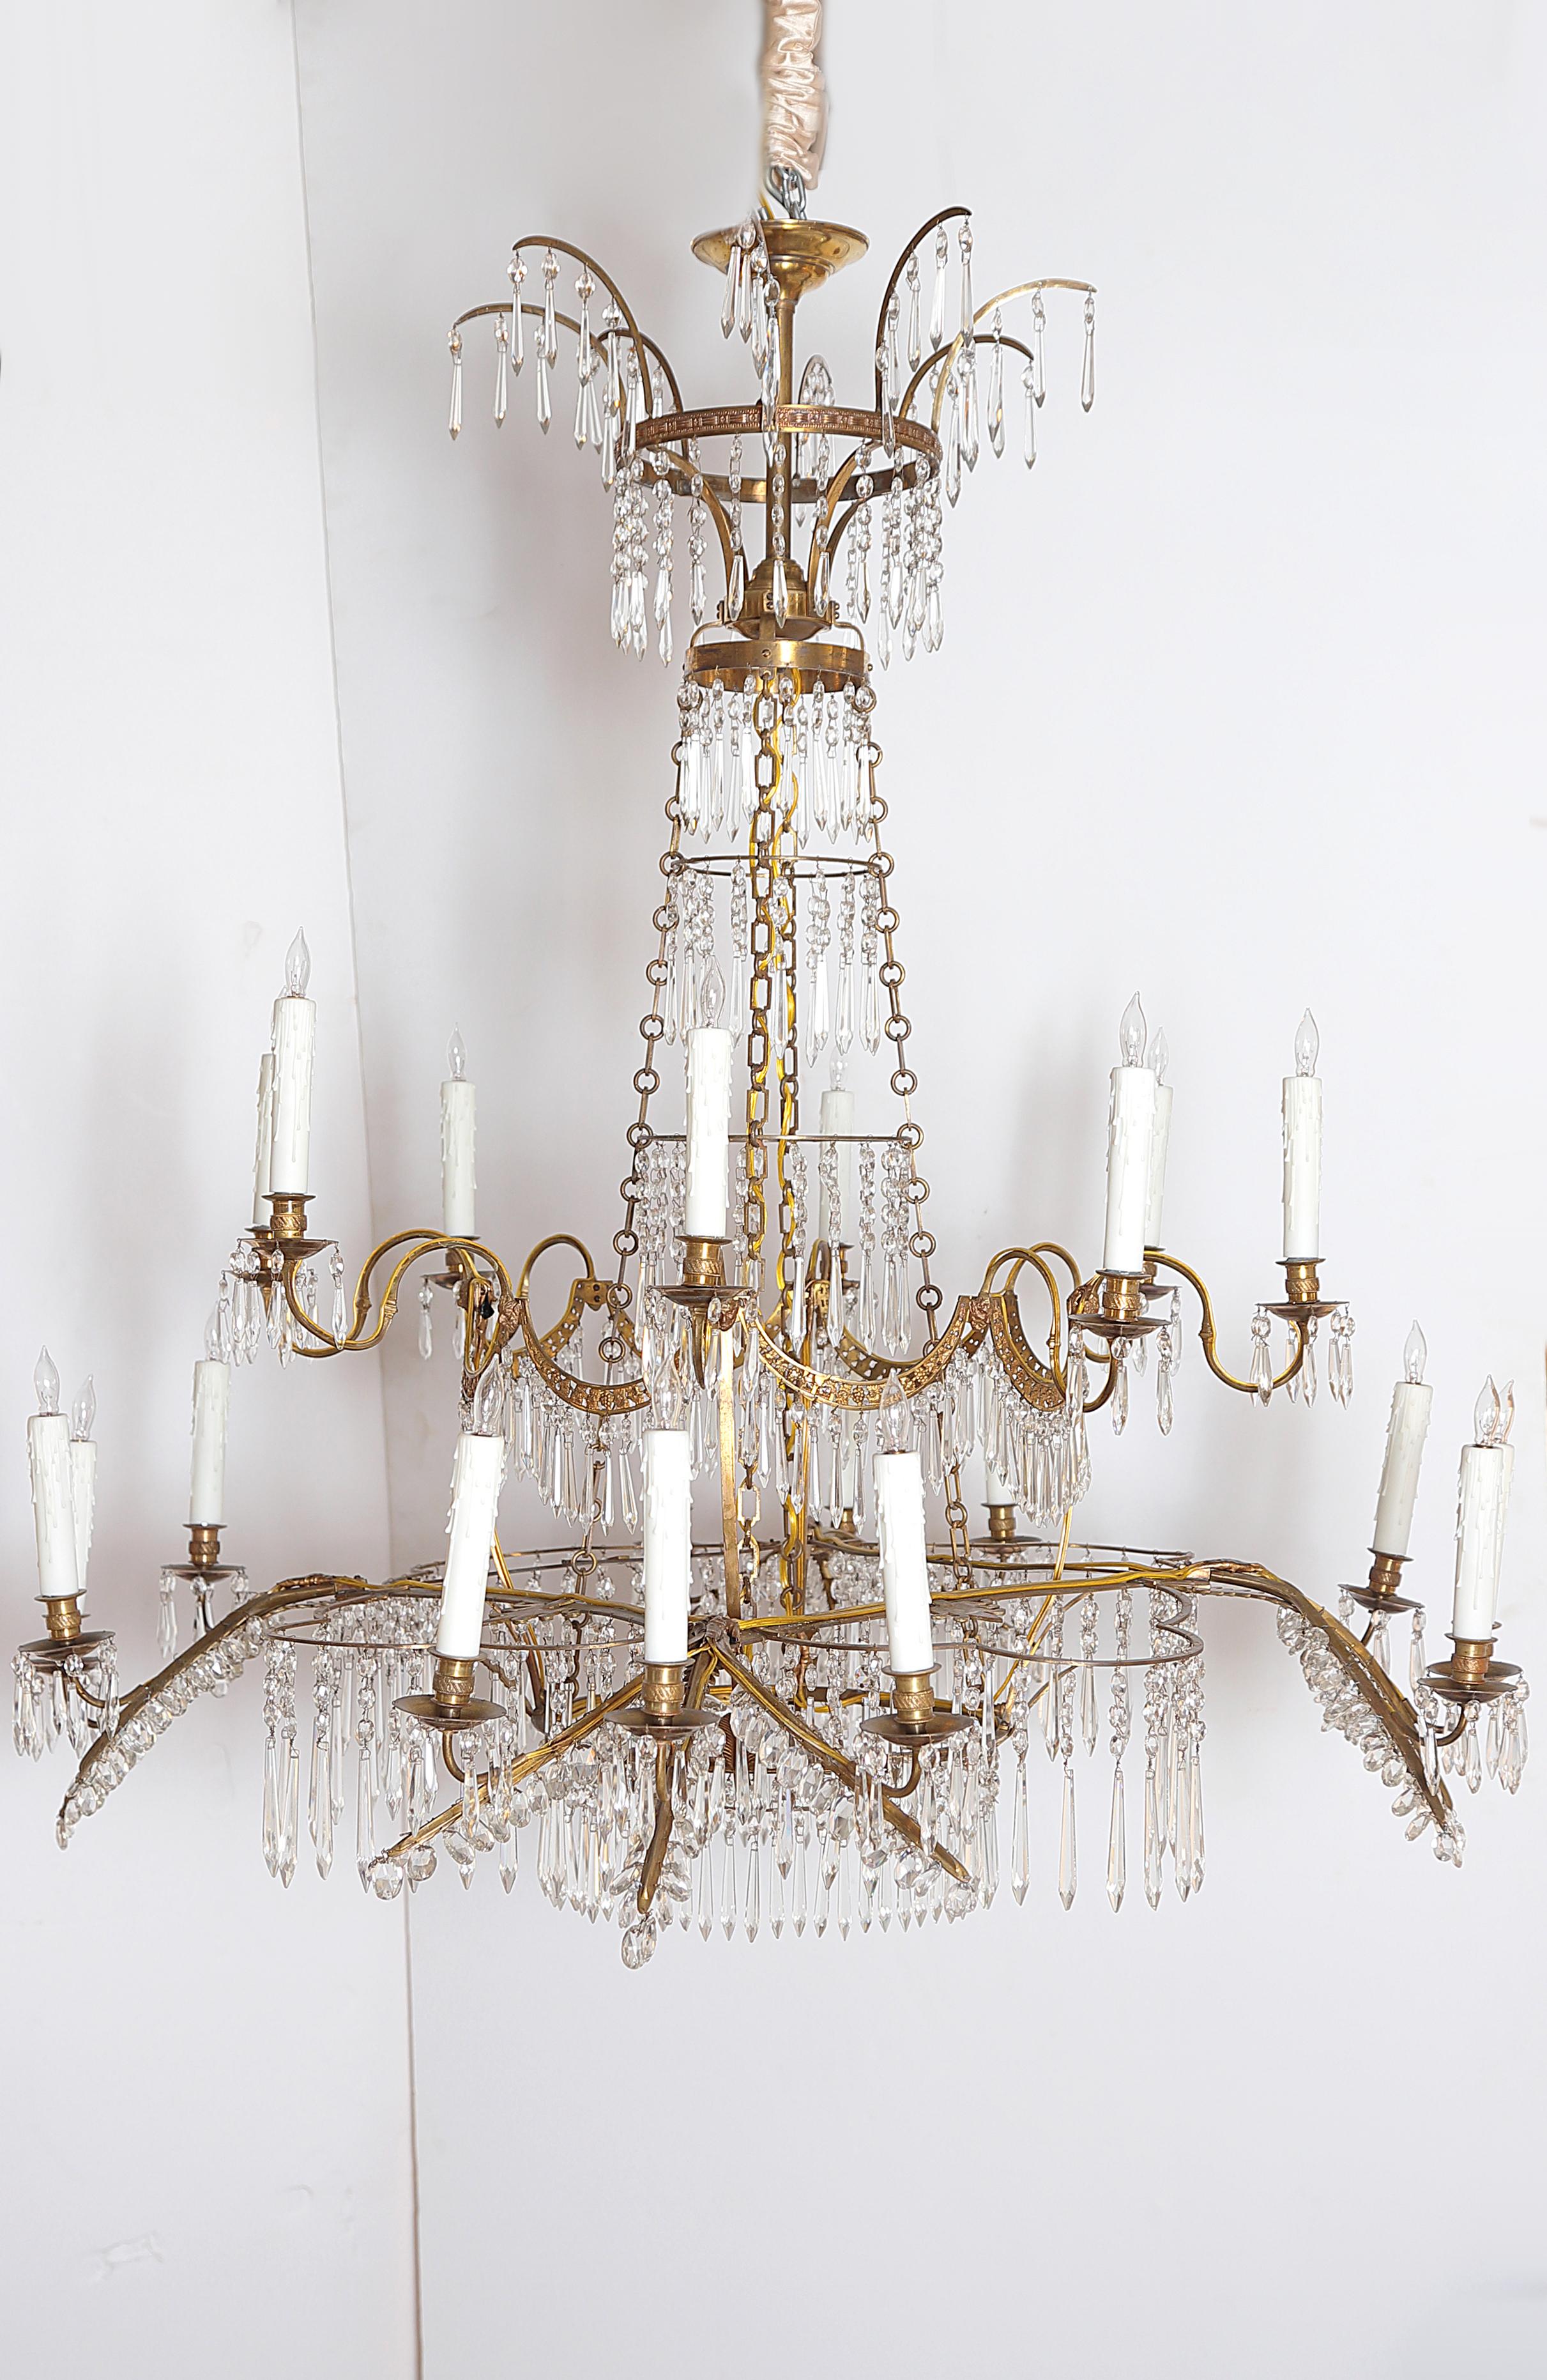 Bronze 18th Century 20-Light Neoclassic Chandelier, German Probably Werner & Mieth For Sale